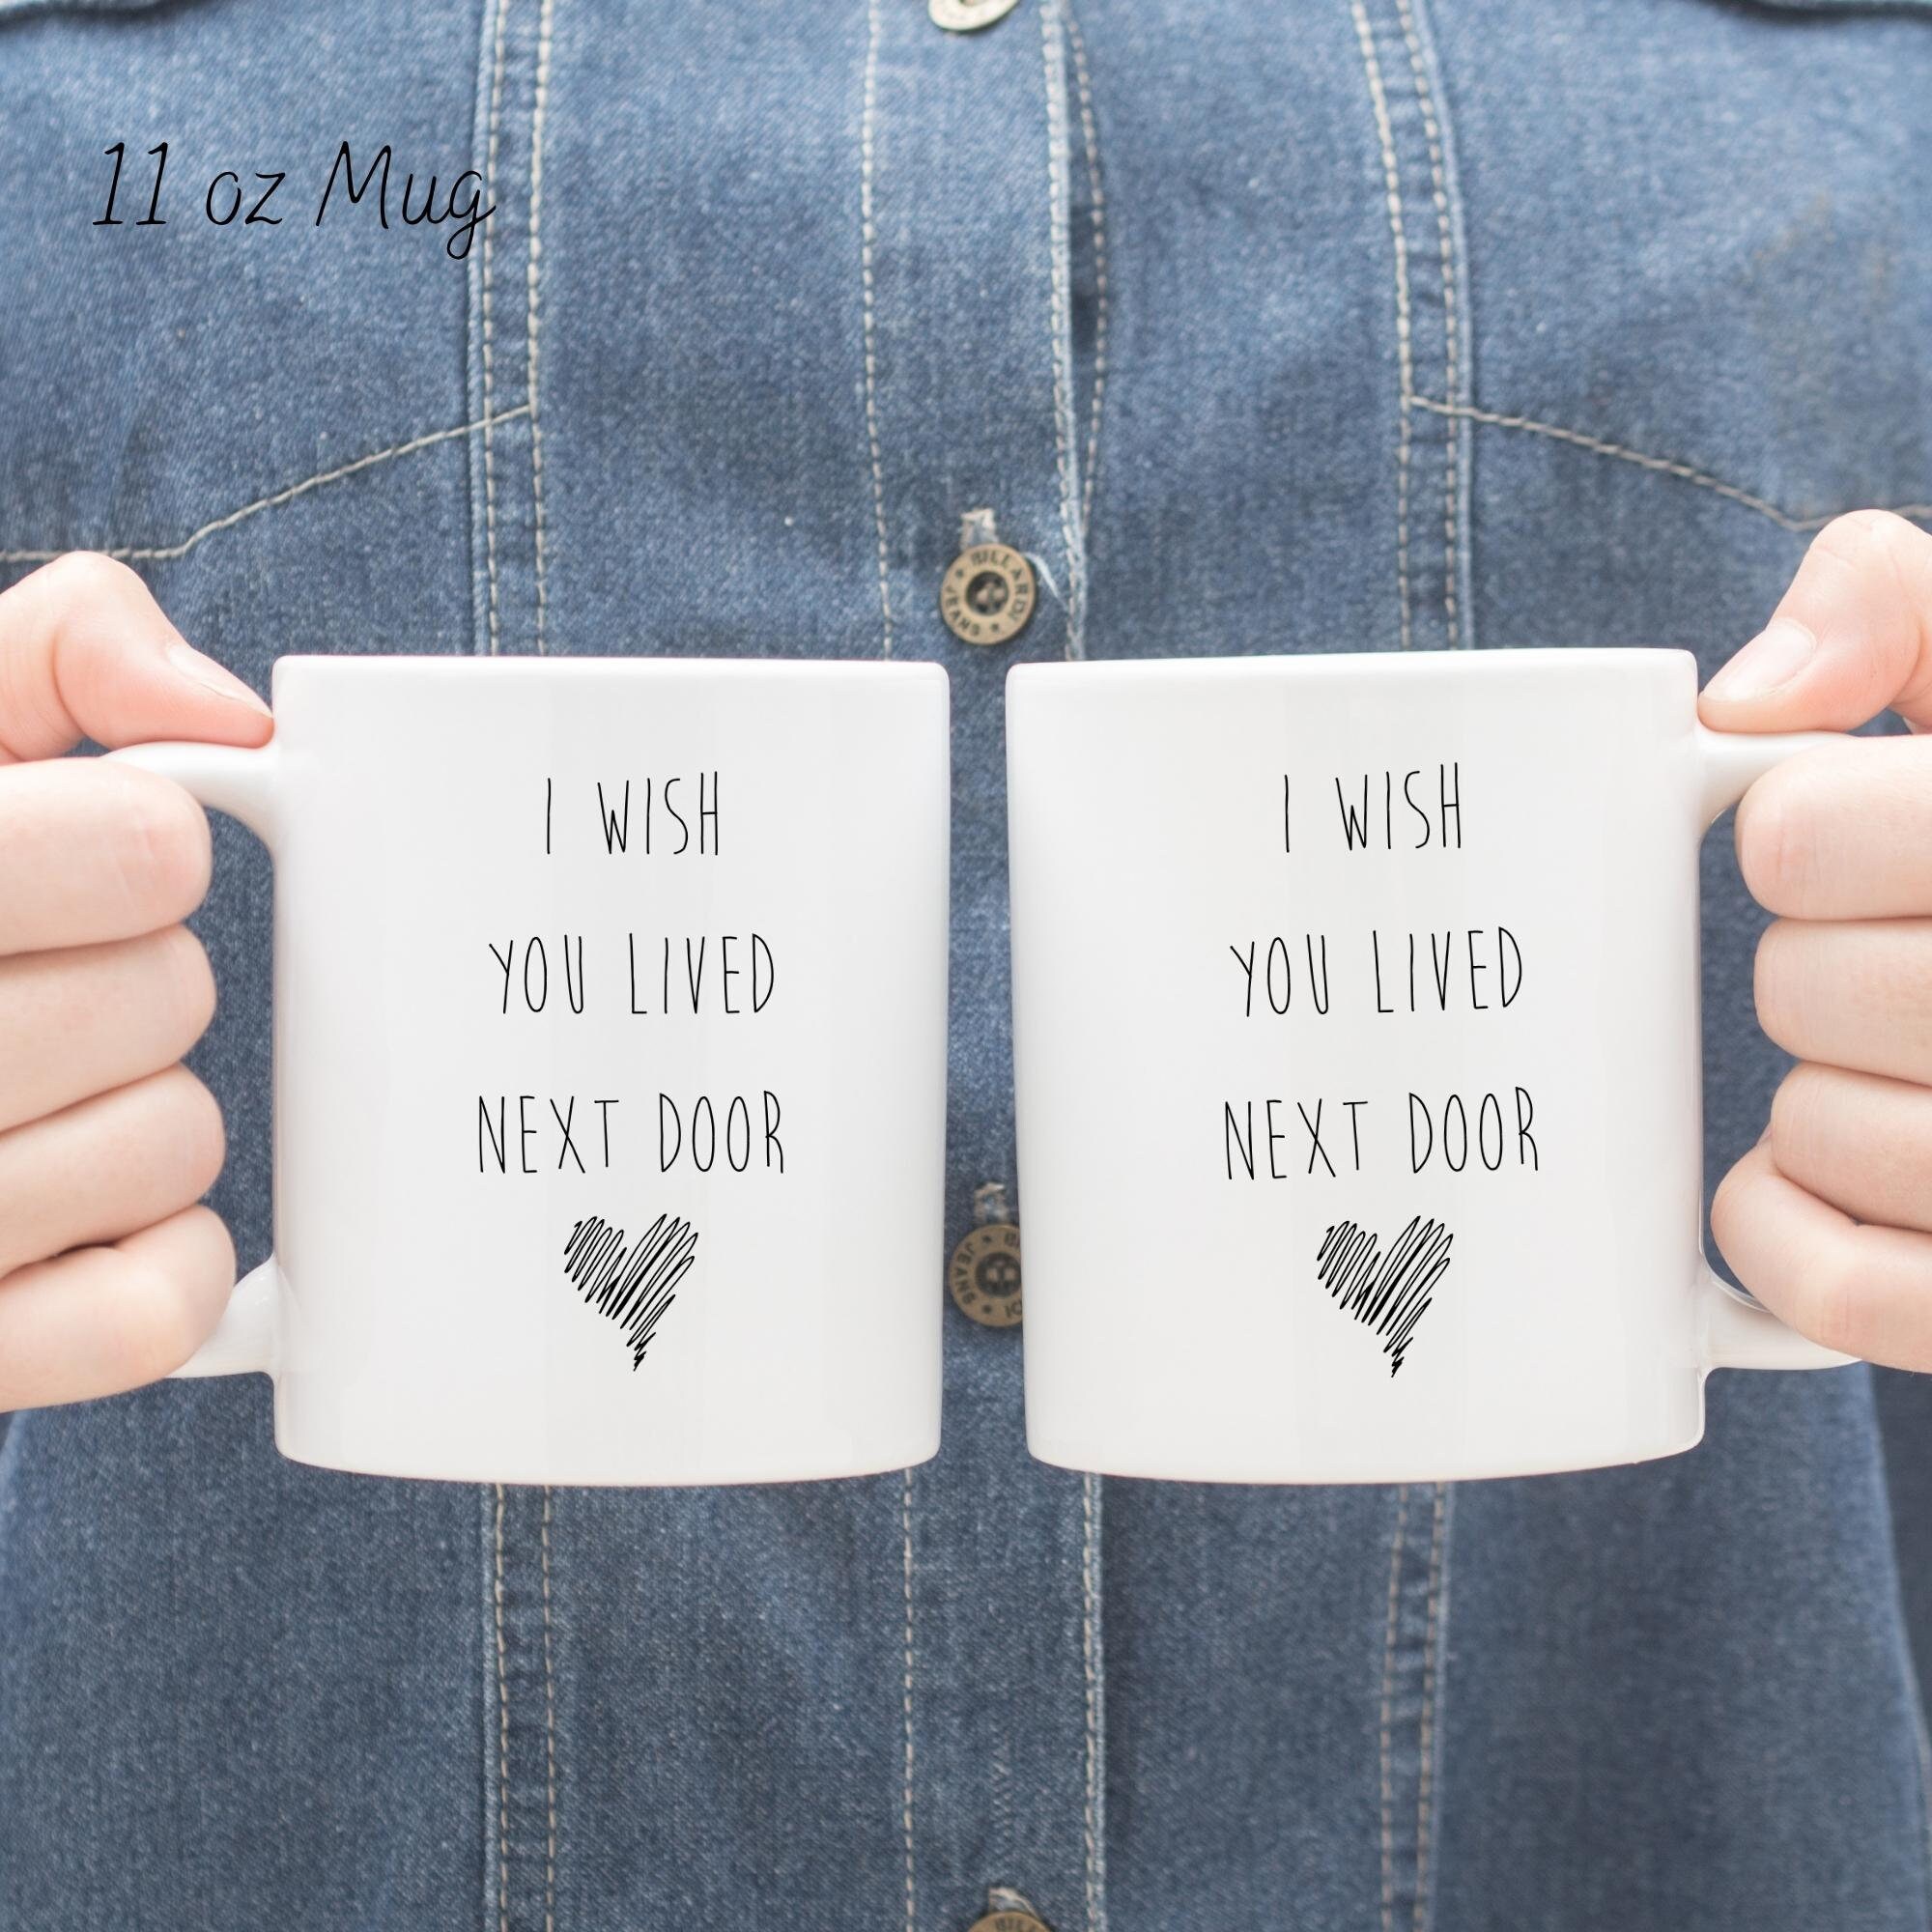 Discover I Wish You Lived Next Door Mug - Bestie Coffee Mug, Best Friend Mug, Best Friend Gift, Housewarming Cute Gift, Sister Gifts